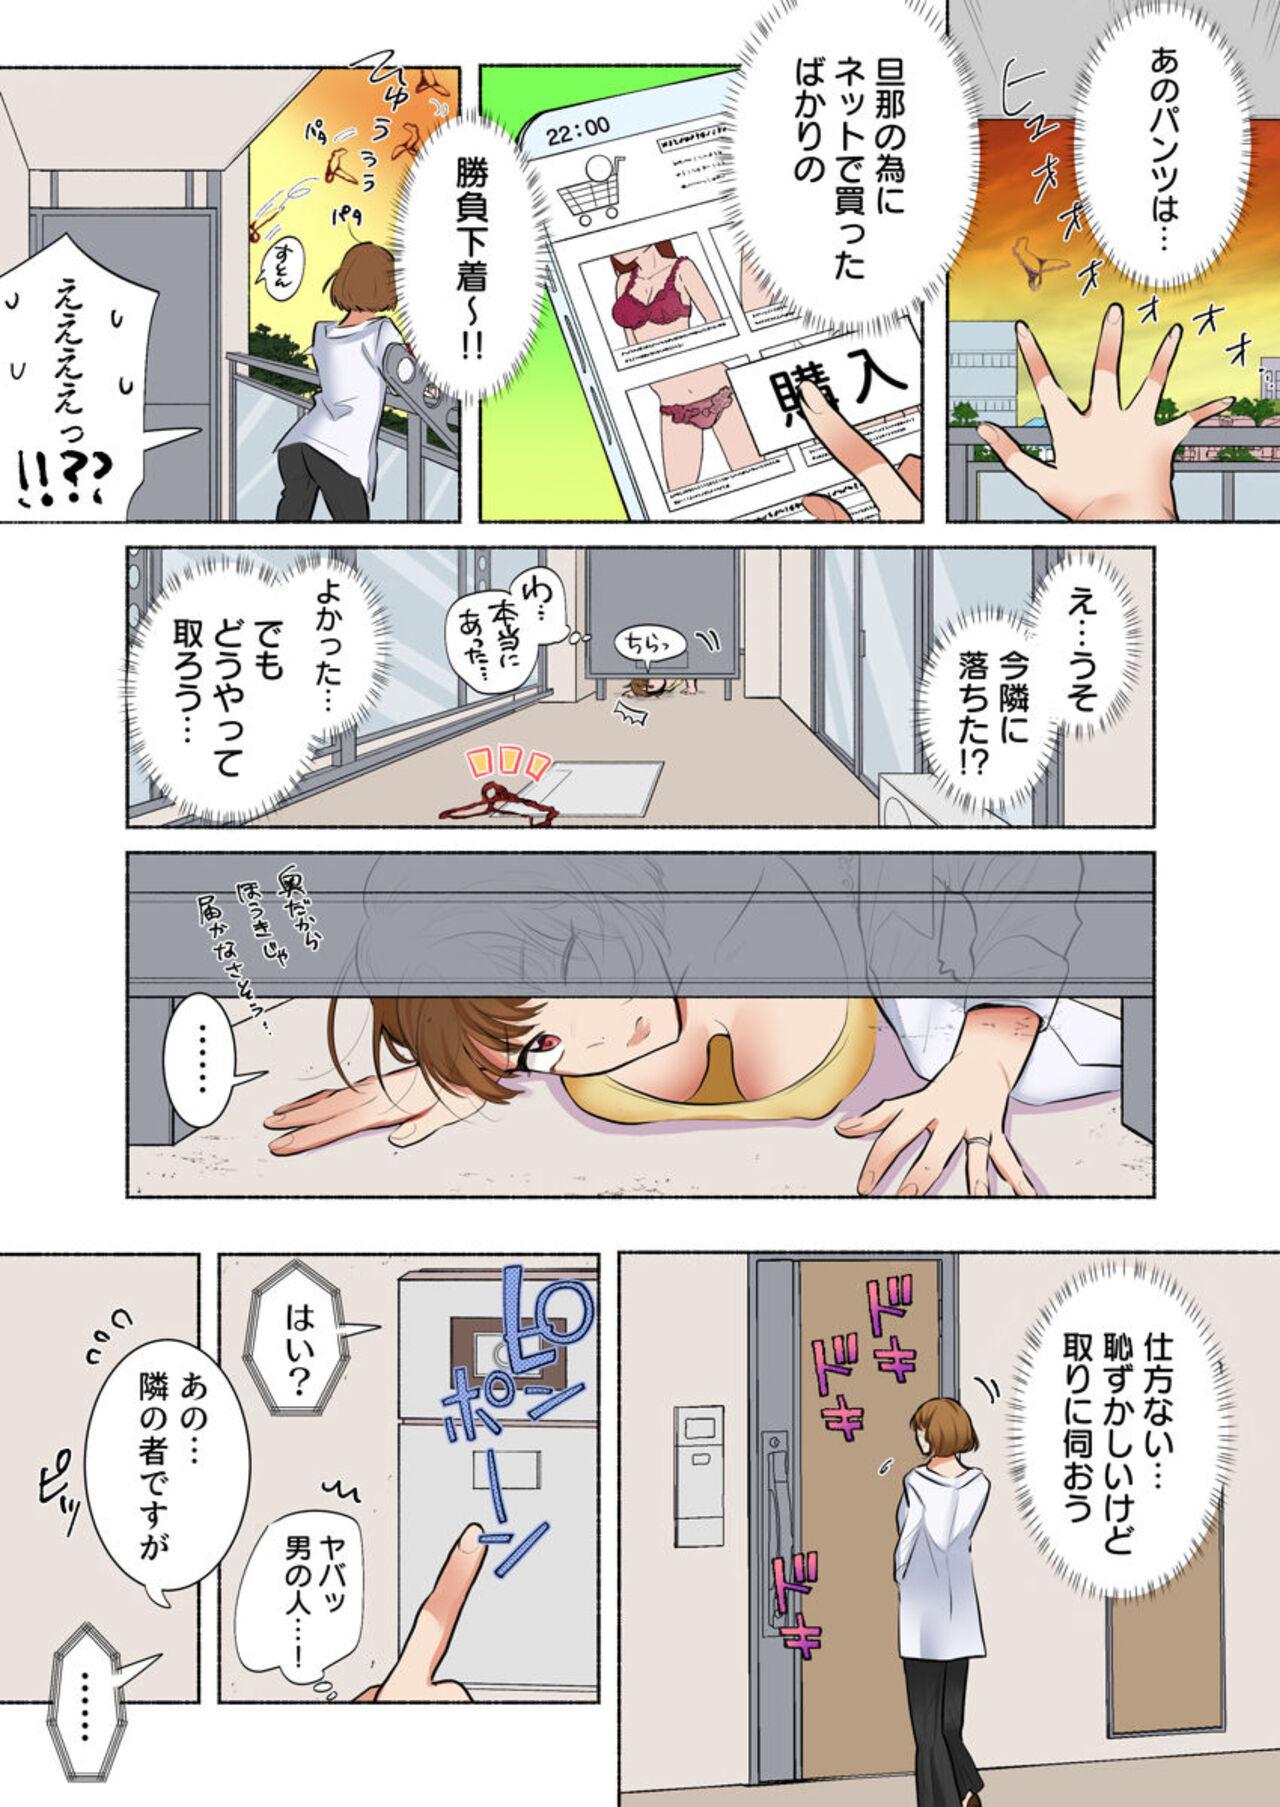 [Ika Hotaru] My Neighbor Is A Sadistic Ex-Boyfriend ~I Love My Husband, But My Aching Body Has Been Redeveloped~ (Full Color) 1 18